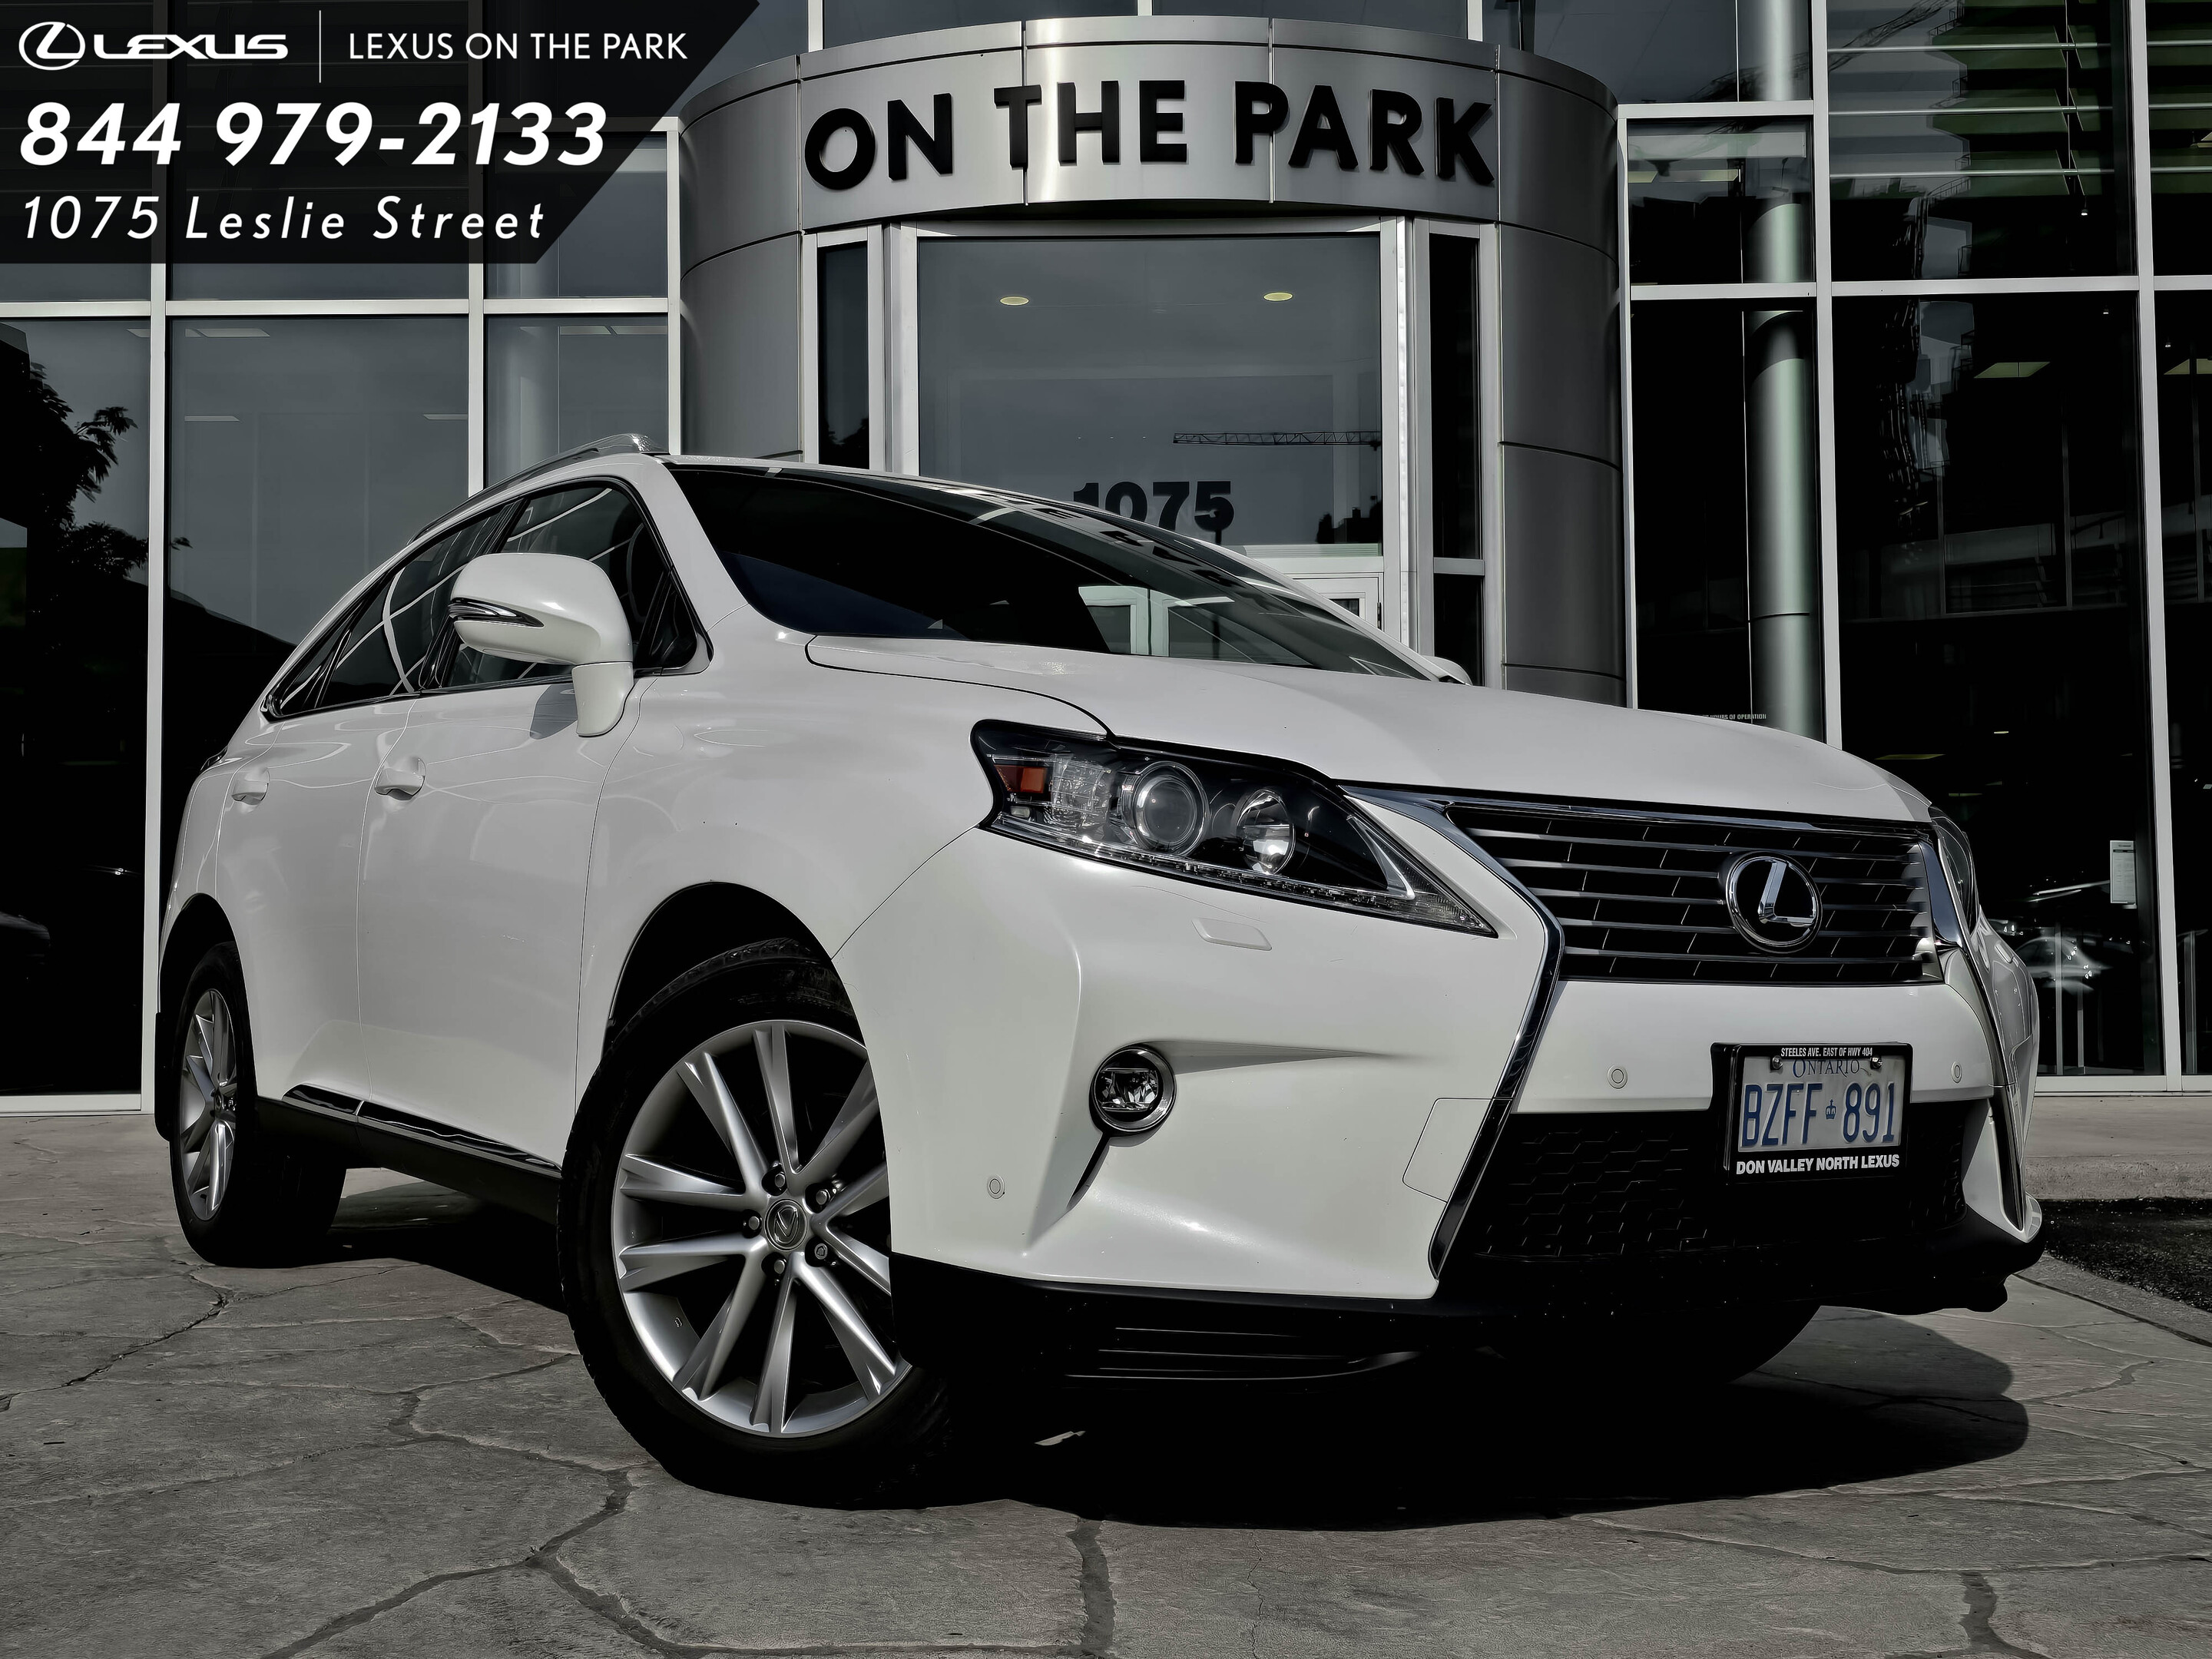 2015 Lexus RX 350 Touring Pkg|Safety Certified|Welcome Trades|